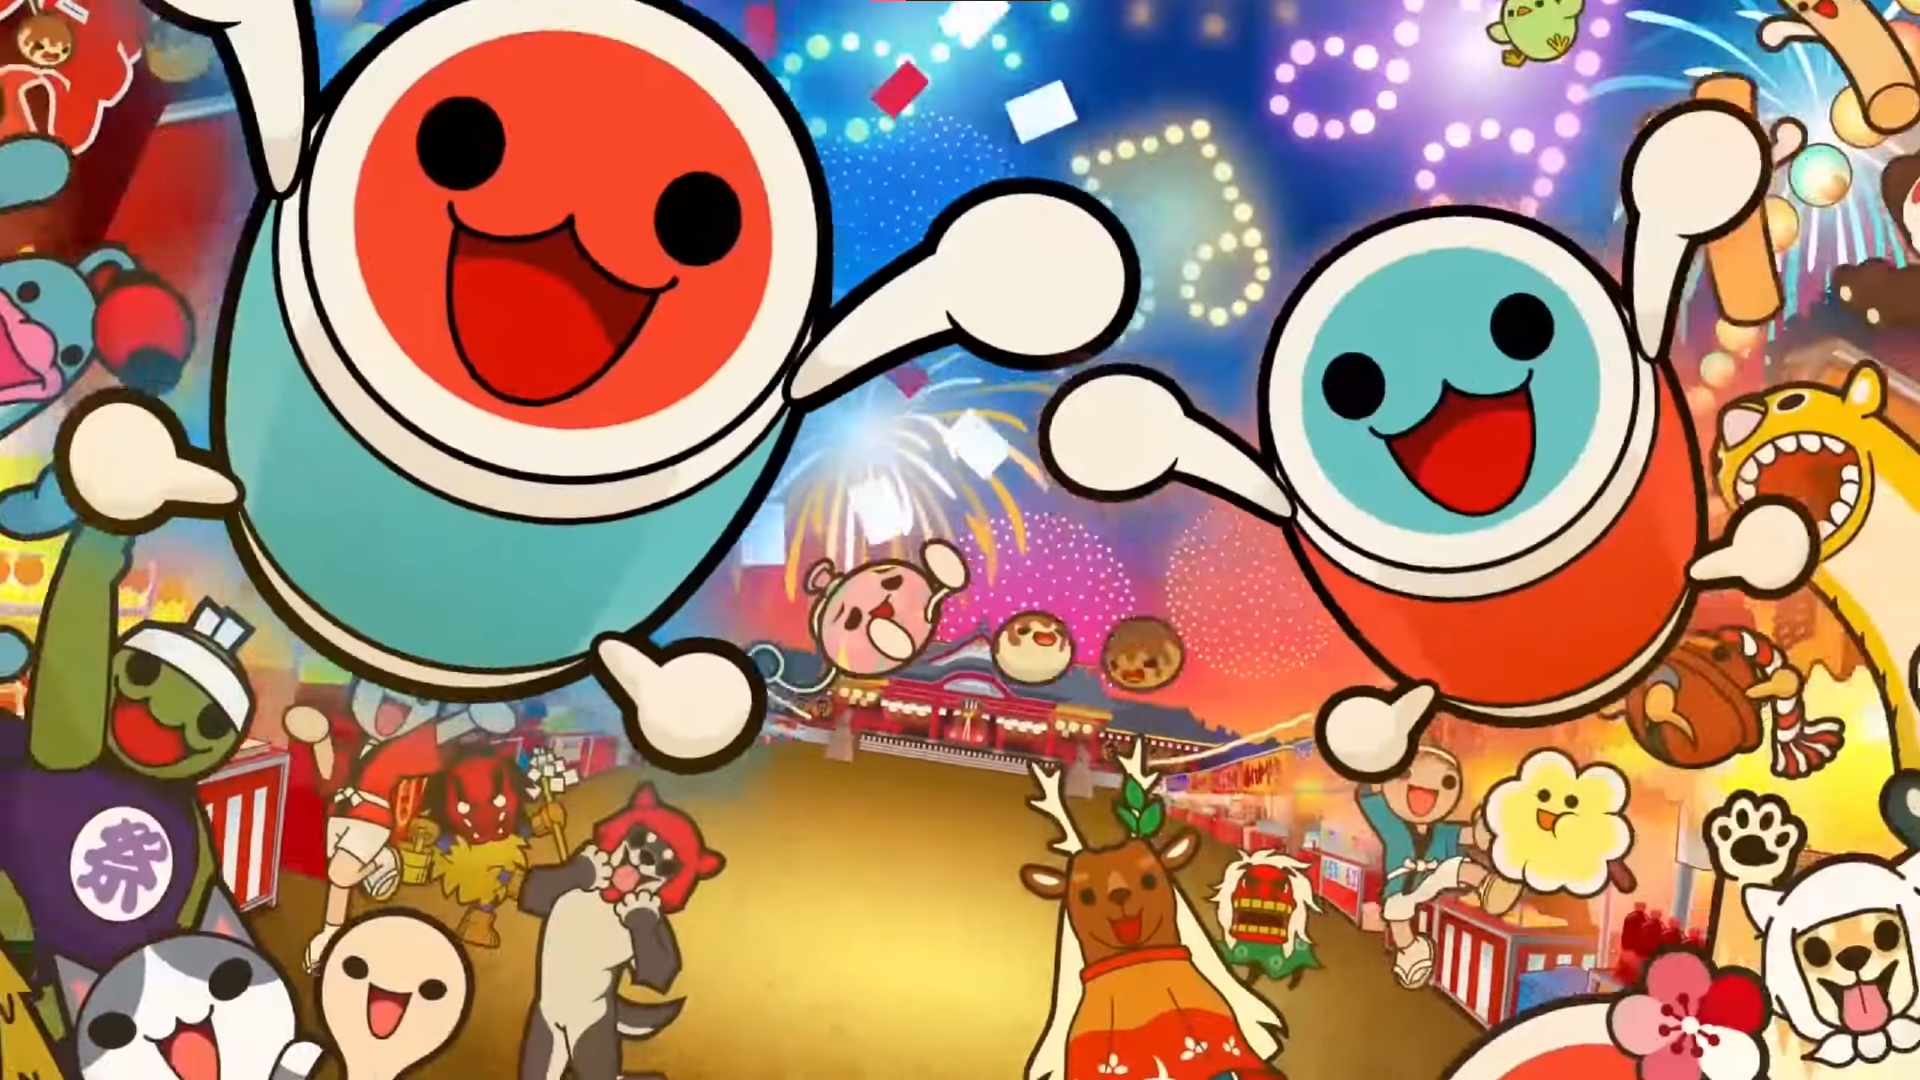  Taiko no Tatsujin is finally out on PC, but it's currently unplayable 